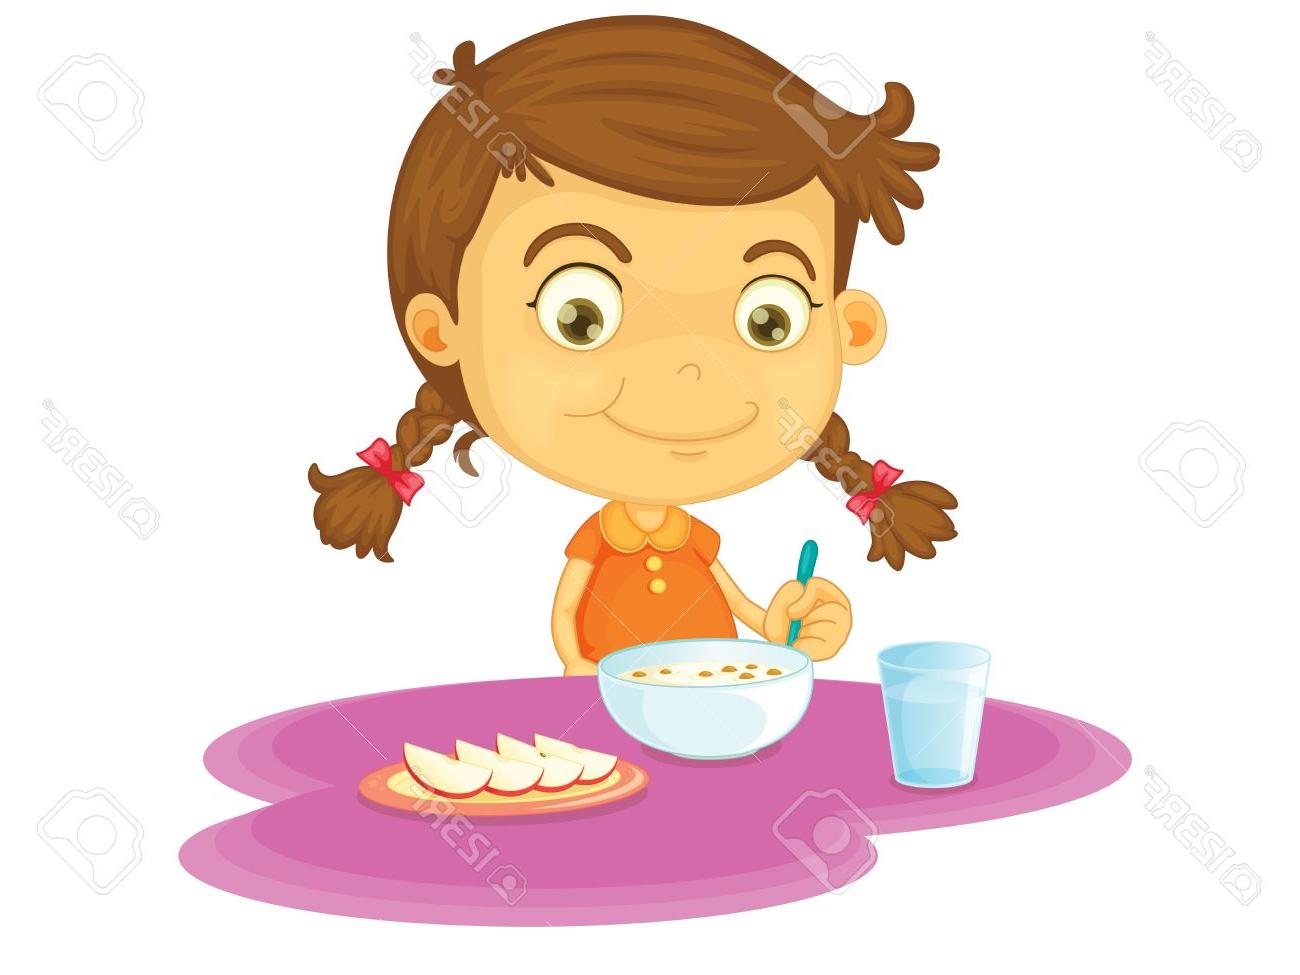 Eating breakfast clipart 9 » Clipart Station.